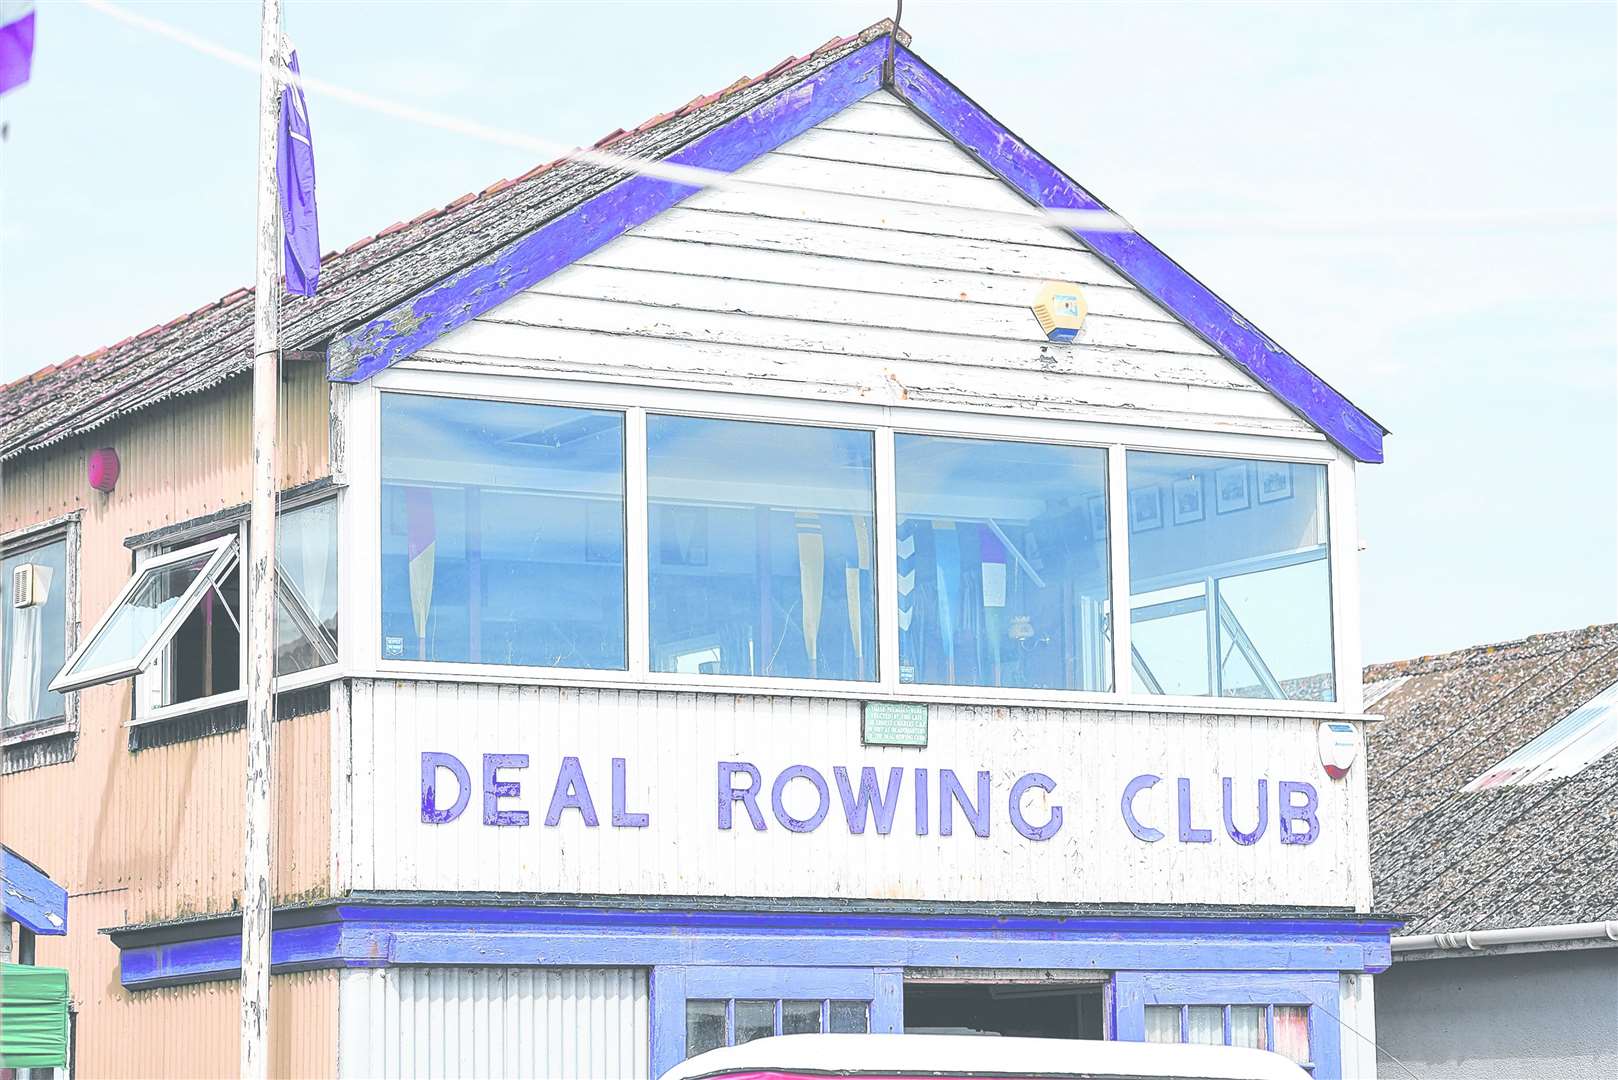 Deal Rowing Club's coffee morning is on Saturday